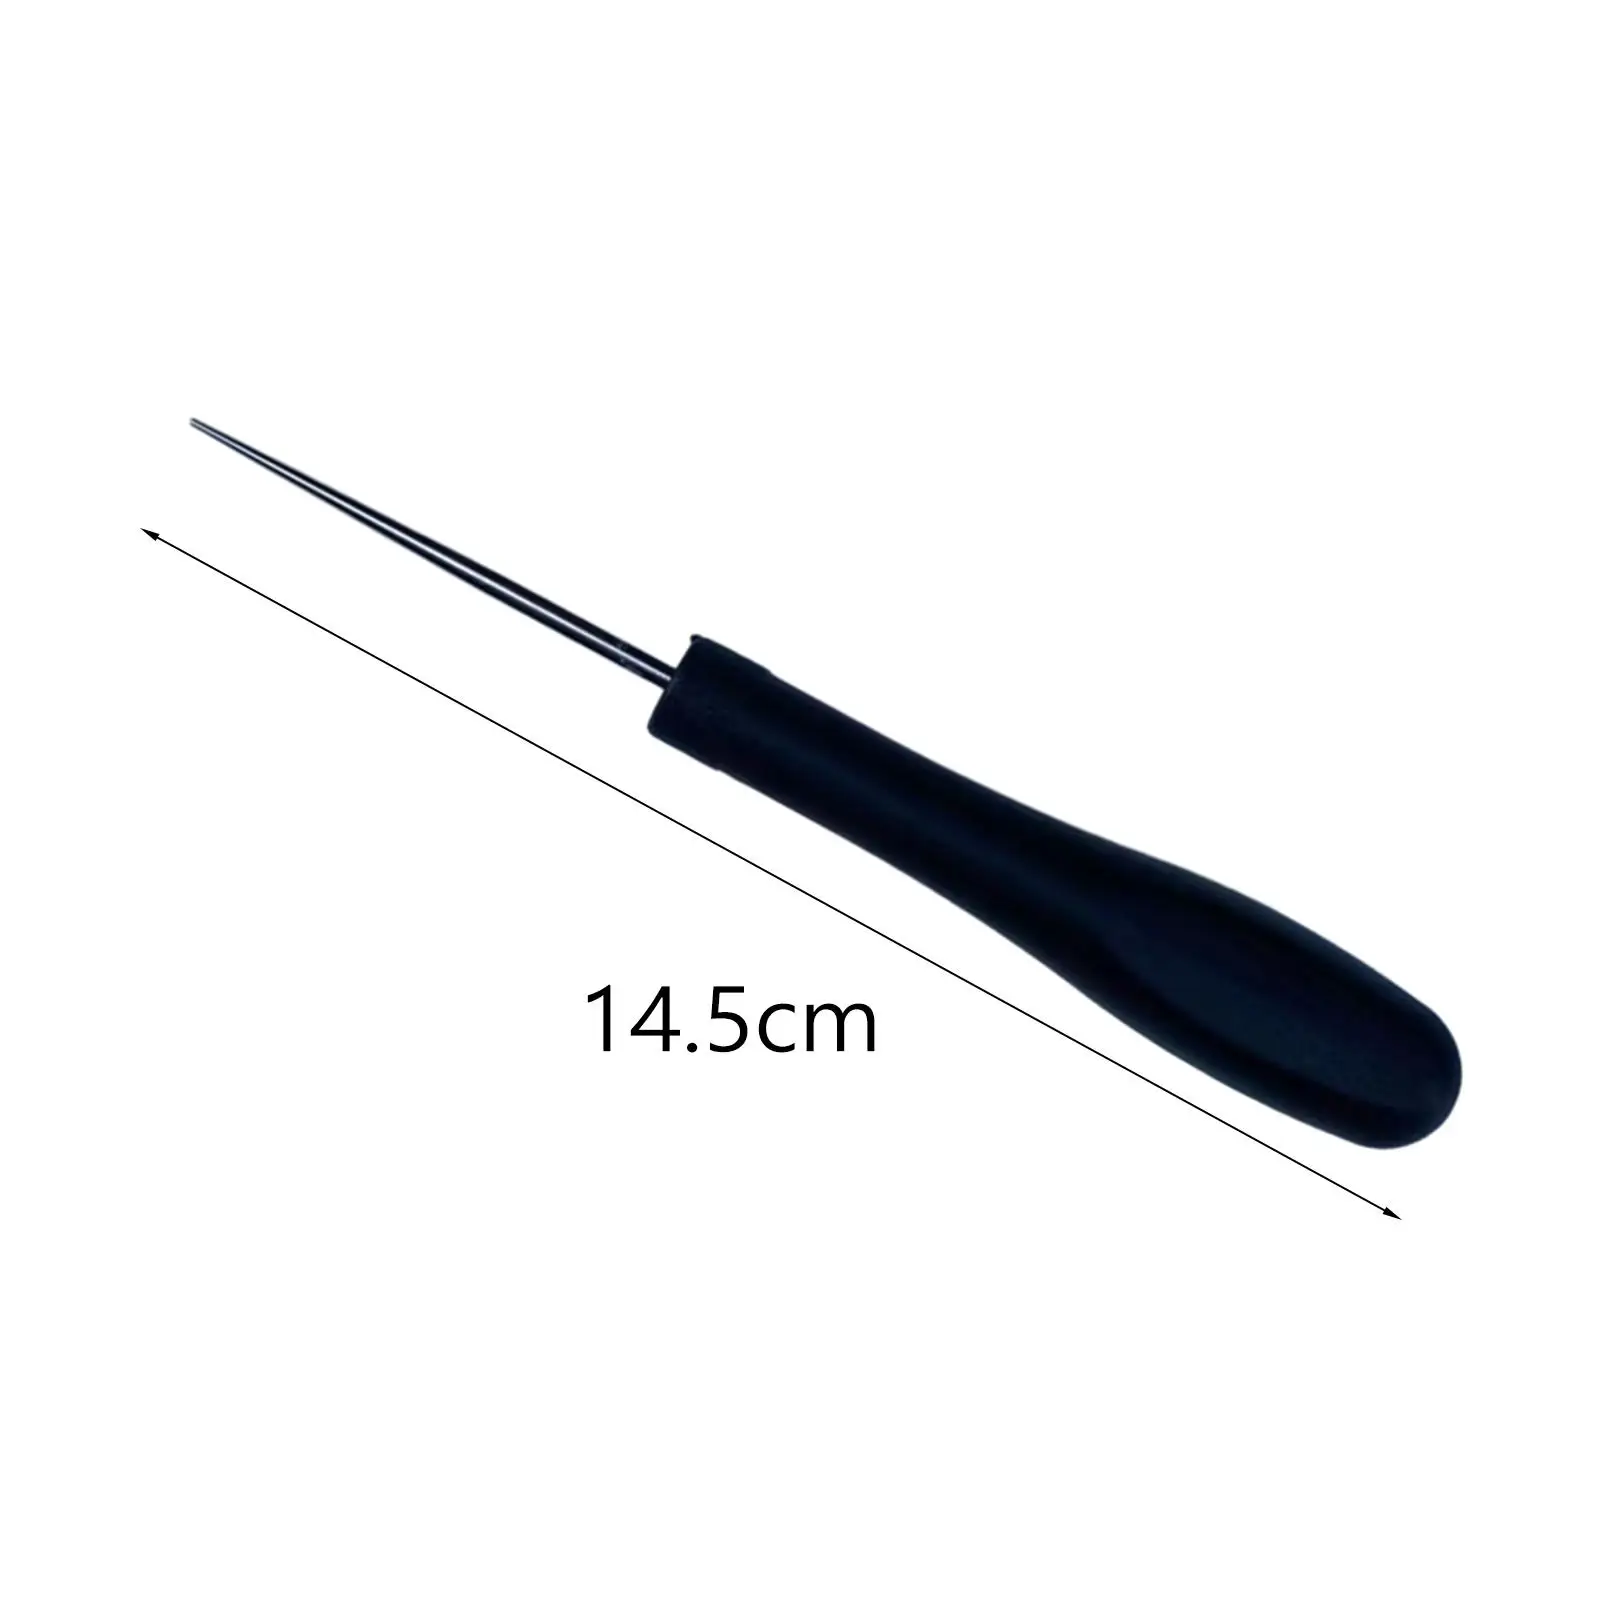 Racquet Stringing Straight Awl Guide Convenient Strong Racket Awl Professional String Support Easy to Use Anti Slip Portable